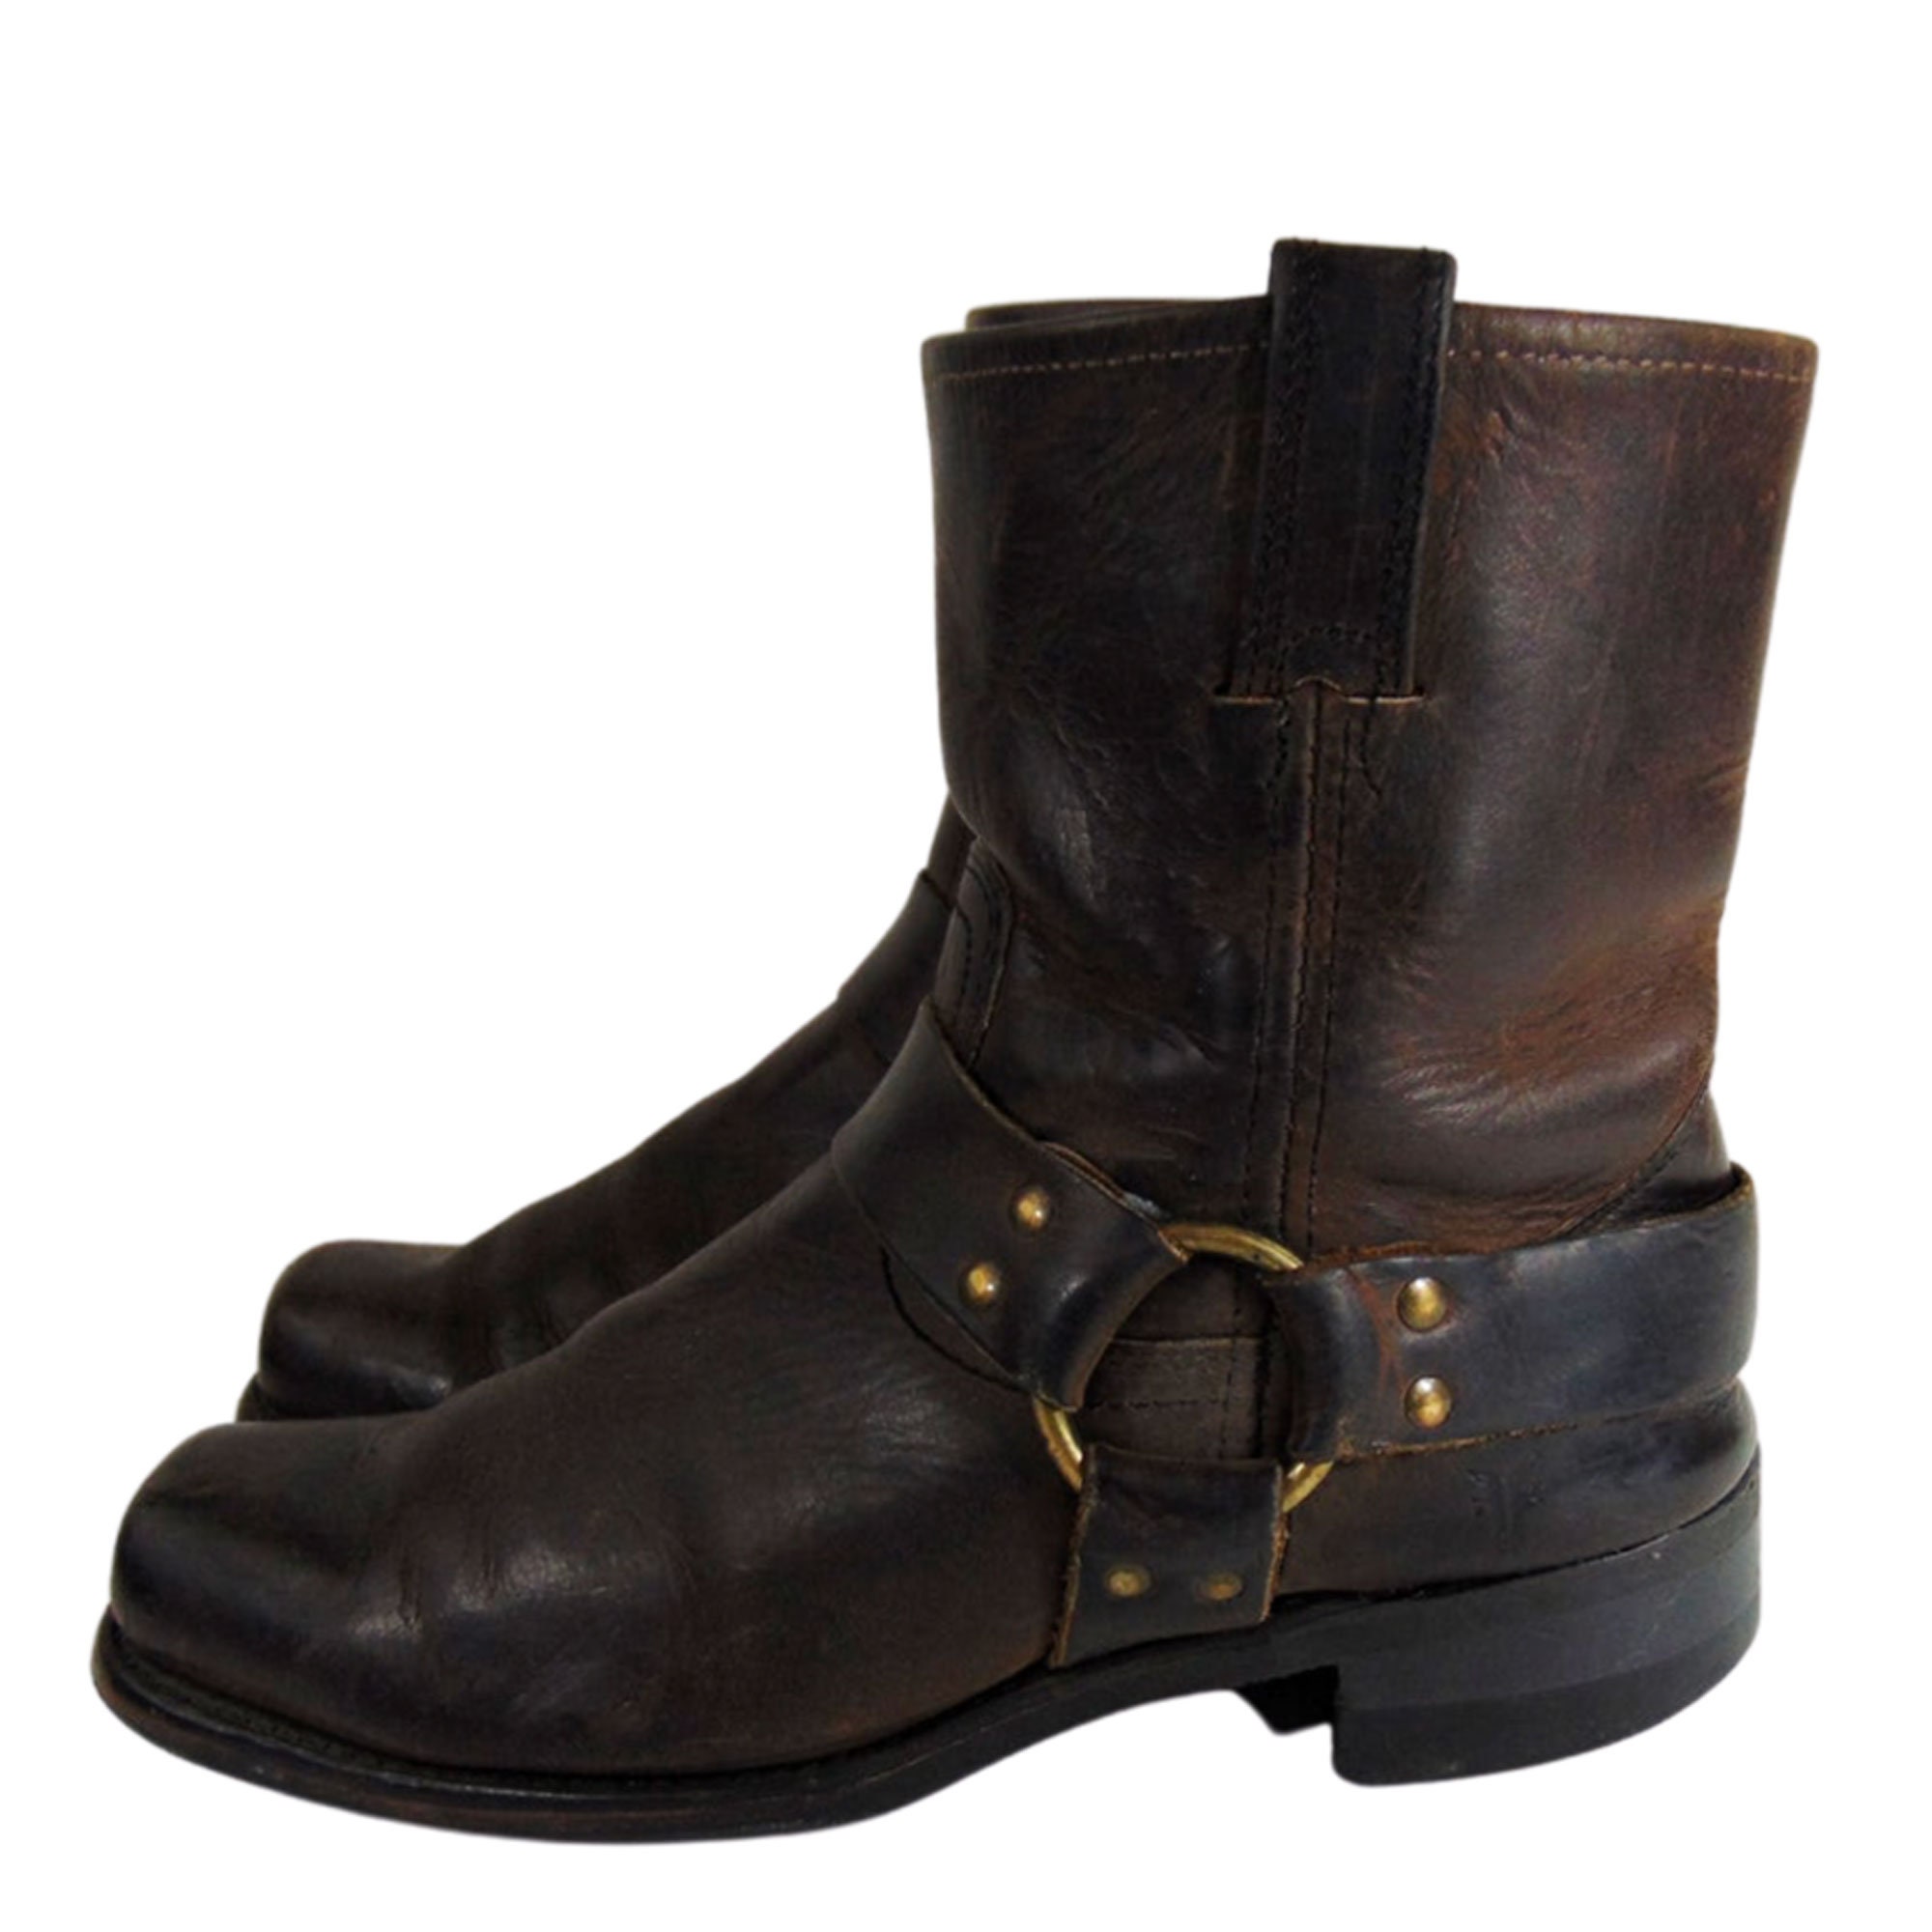 FRYE 87400 HARNESS BROWN Leather Motorcycle Boots Men's Size 9 Riding ...